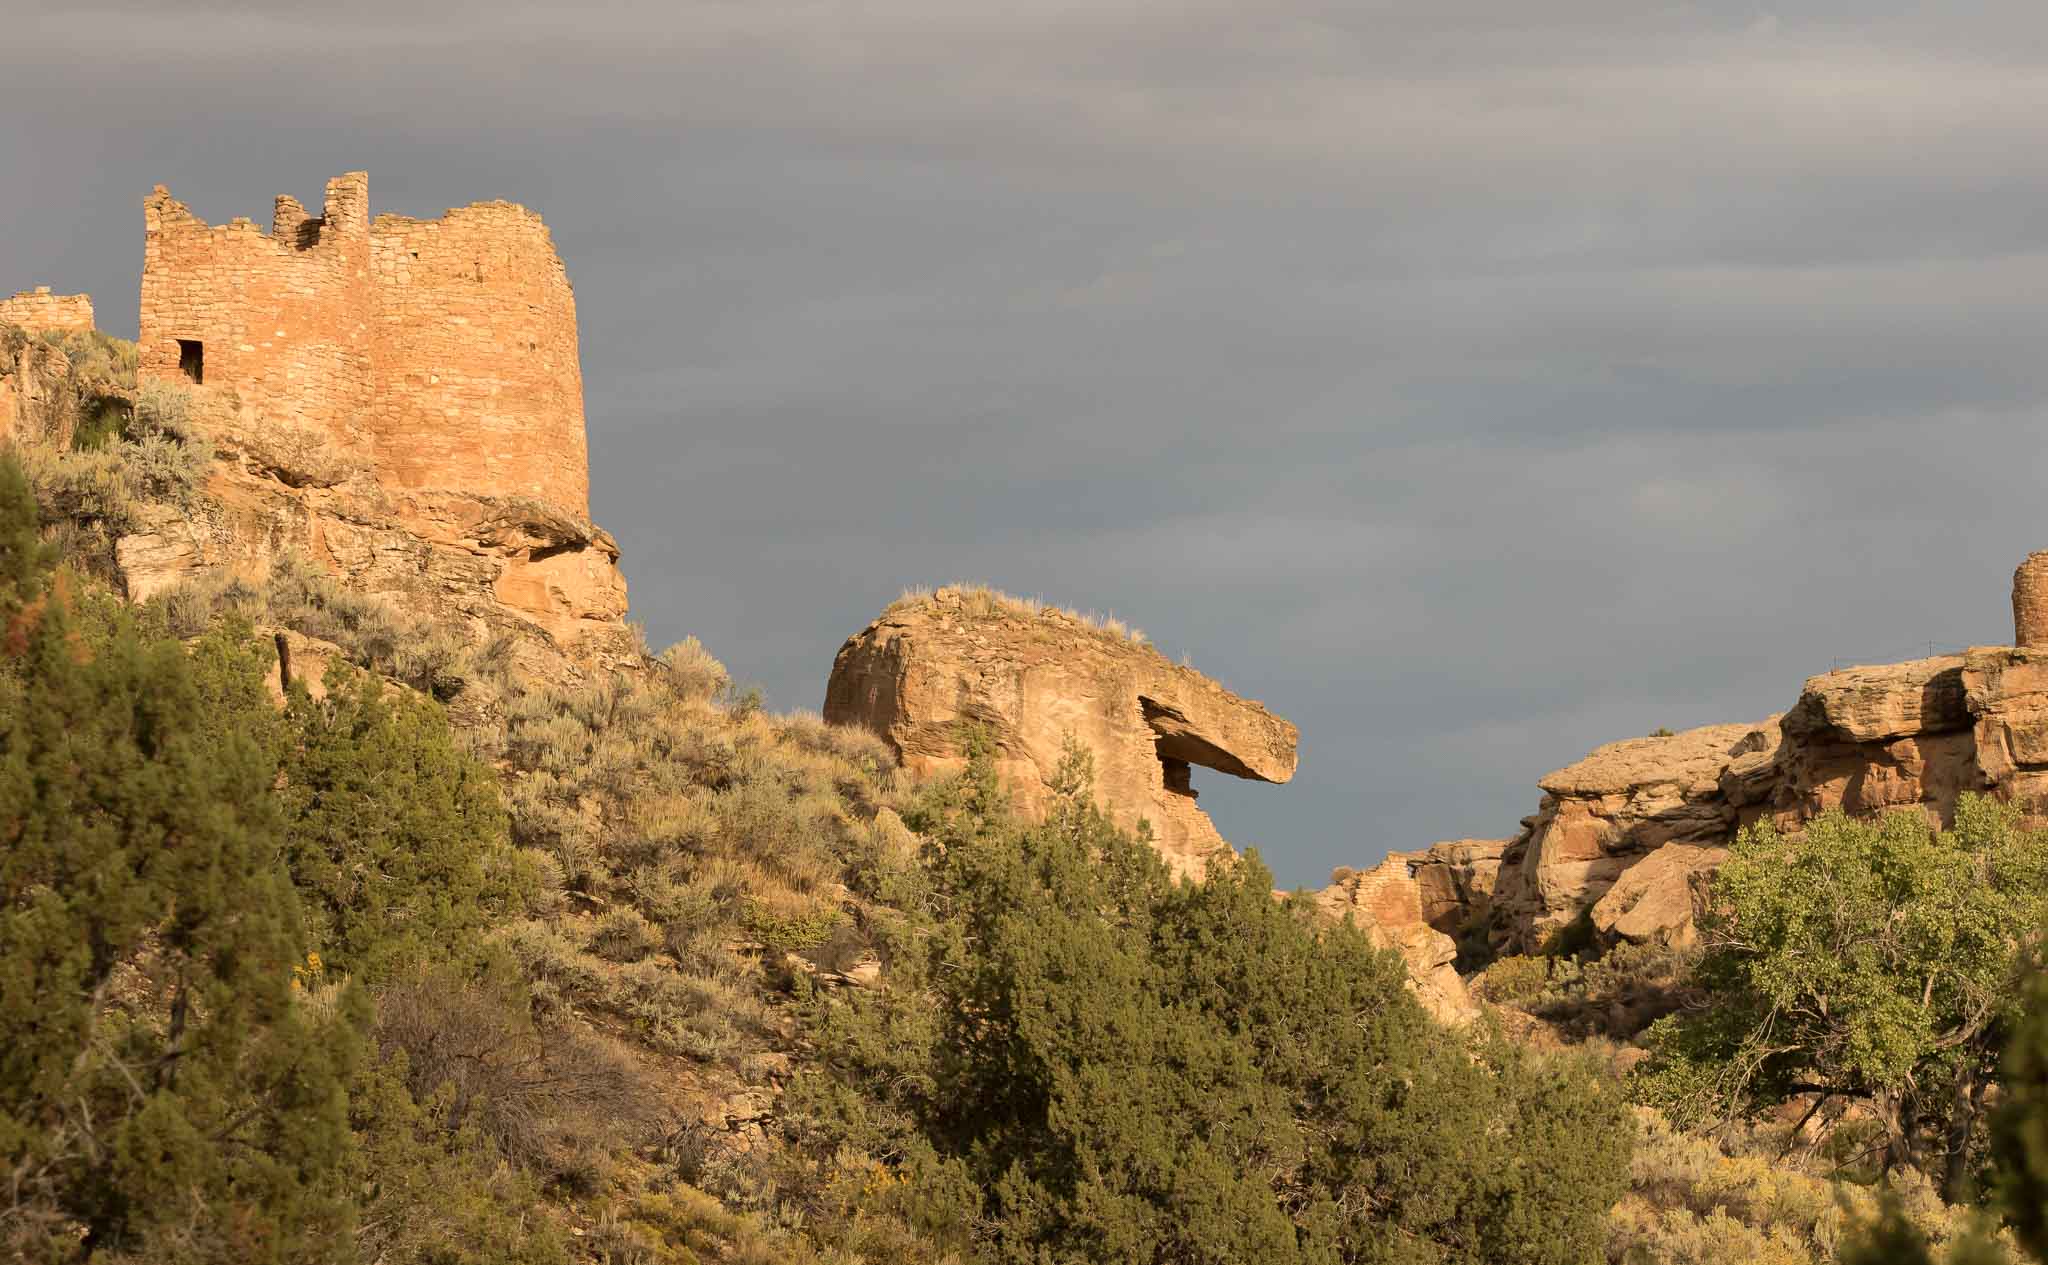 Twin Towers and Eroded Boulder House lit by the rising sun after a rainy night, Hovenweep National Monument, Aneth UT, September 30, 2016